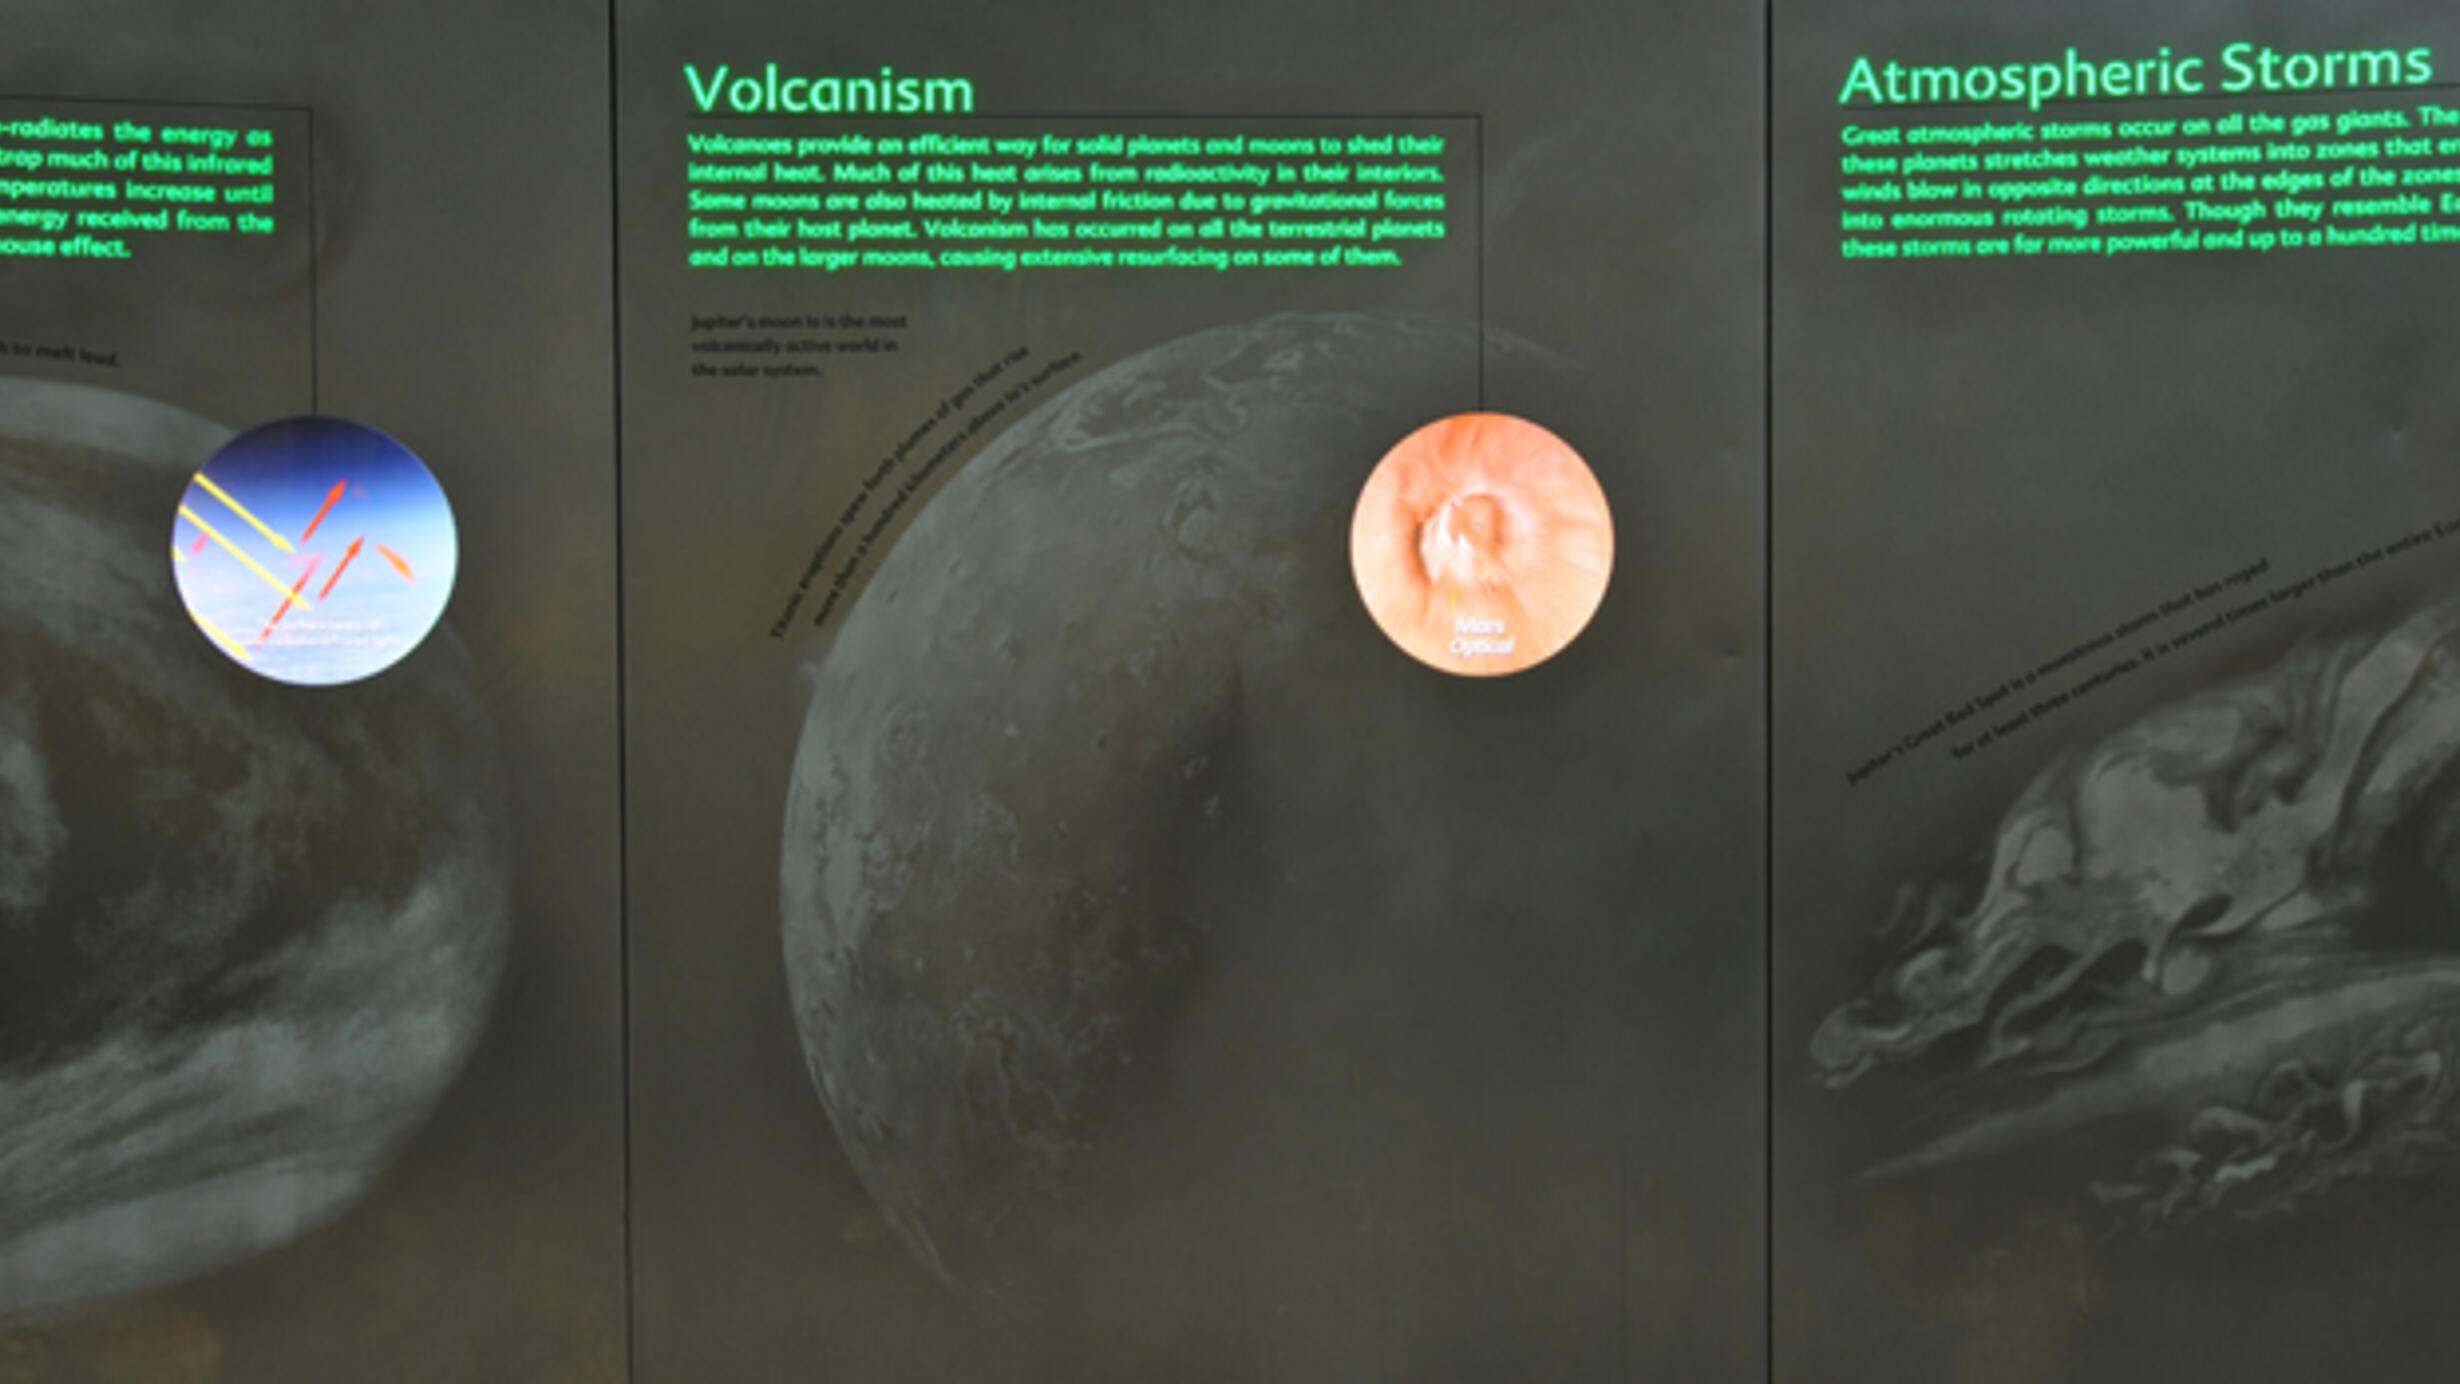 An exhibition hall, an explanation panel about volcanism.